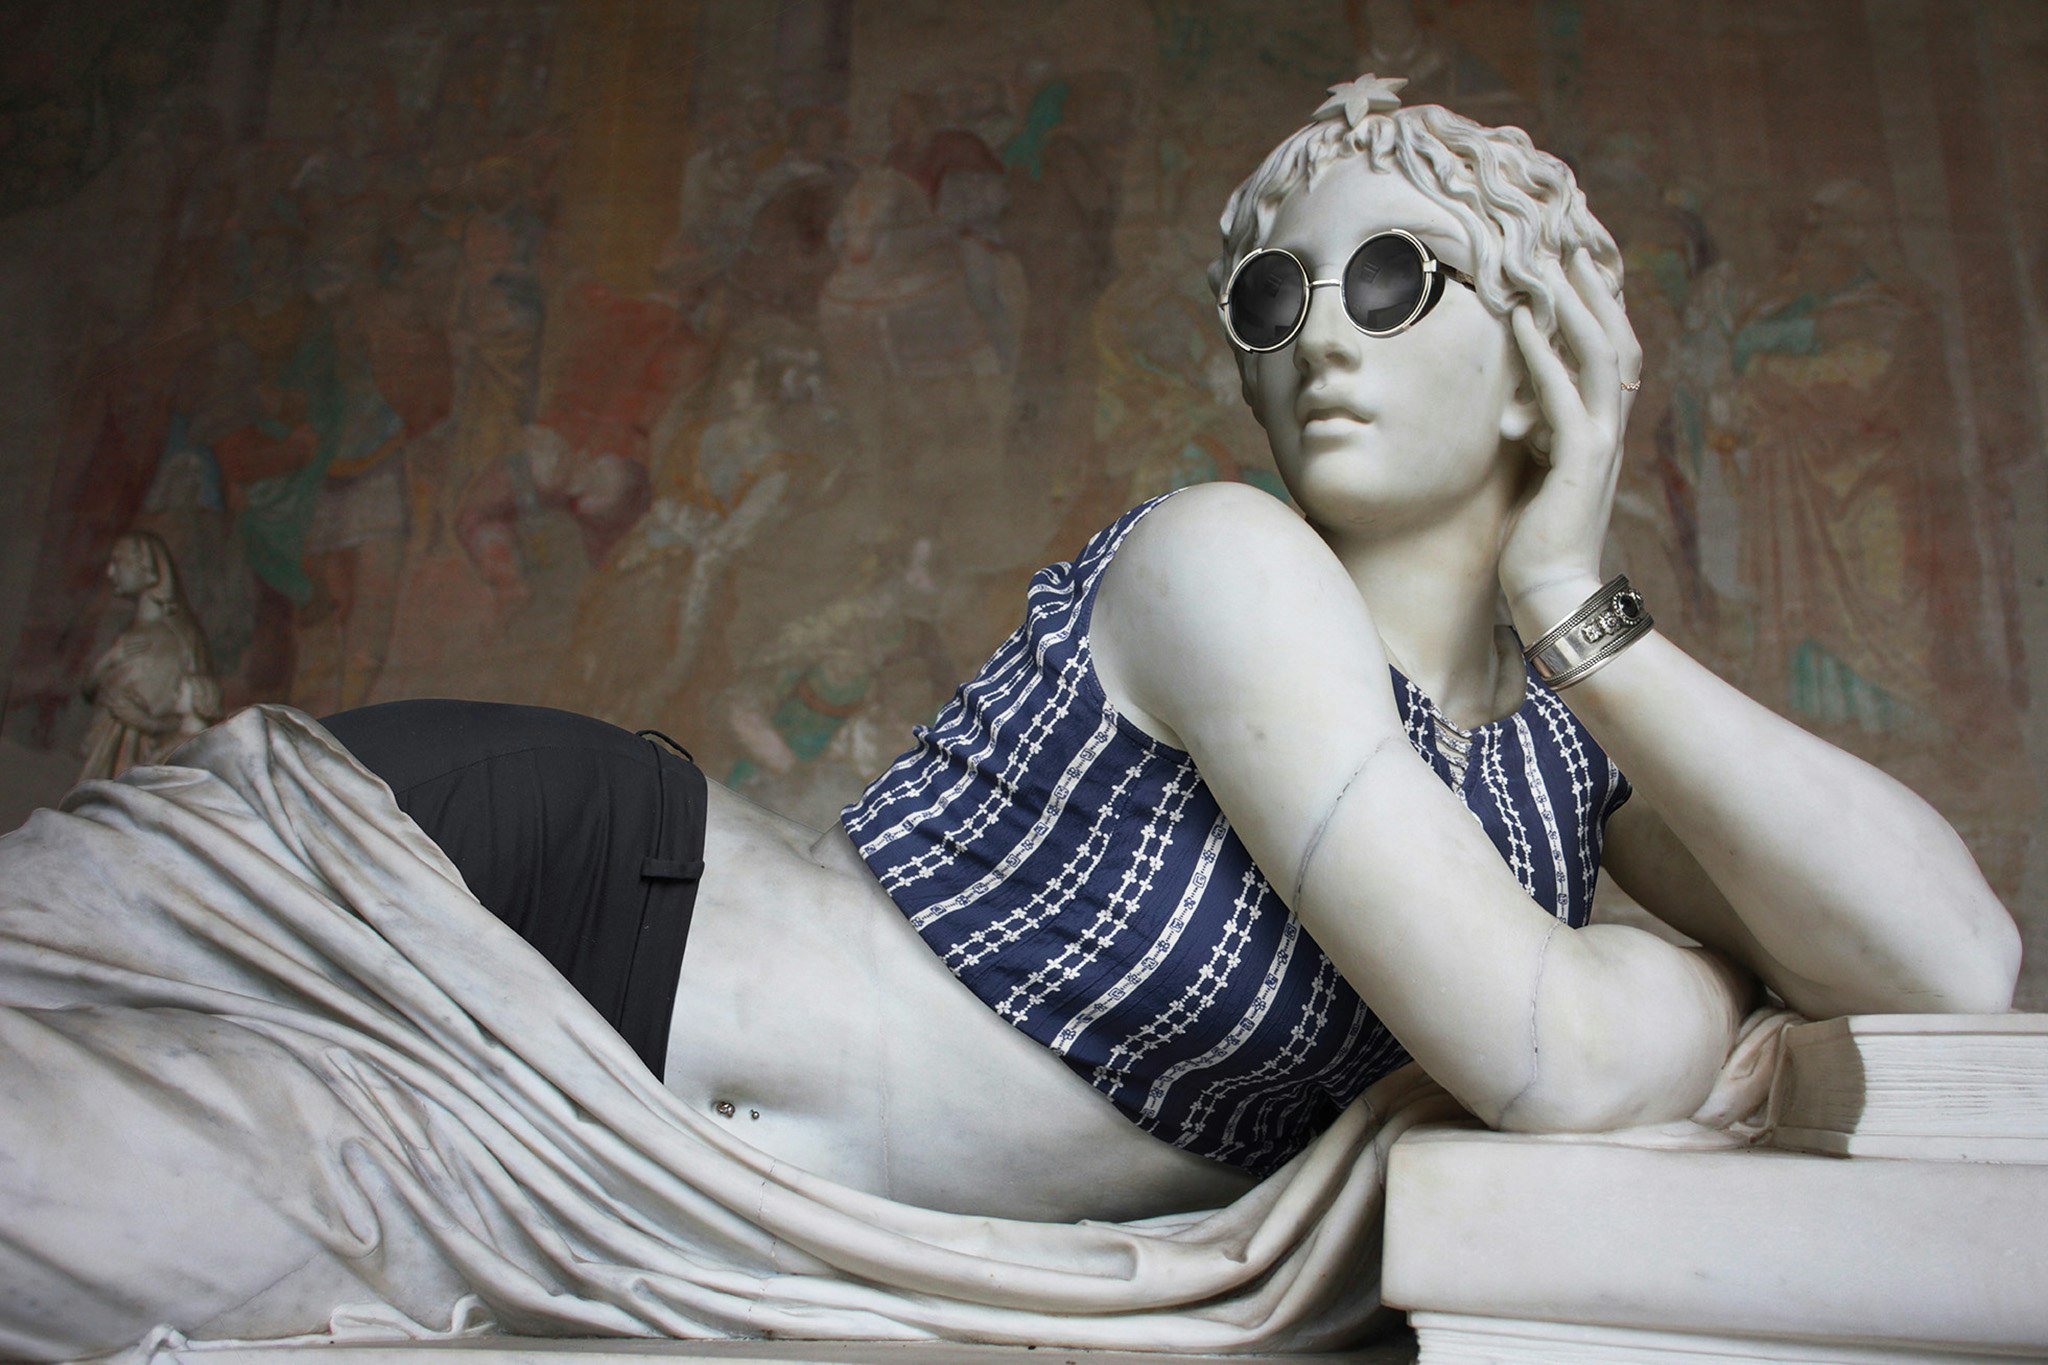 Hipsters in Stone II sees classical Greek sculptures getting a trendy new style.